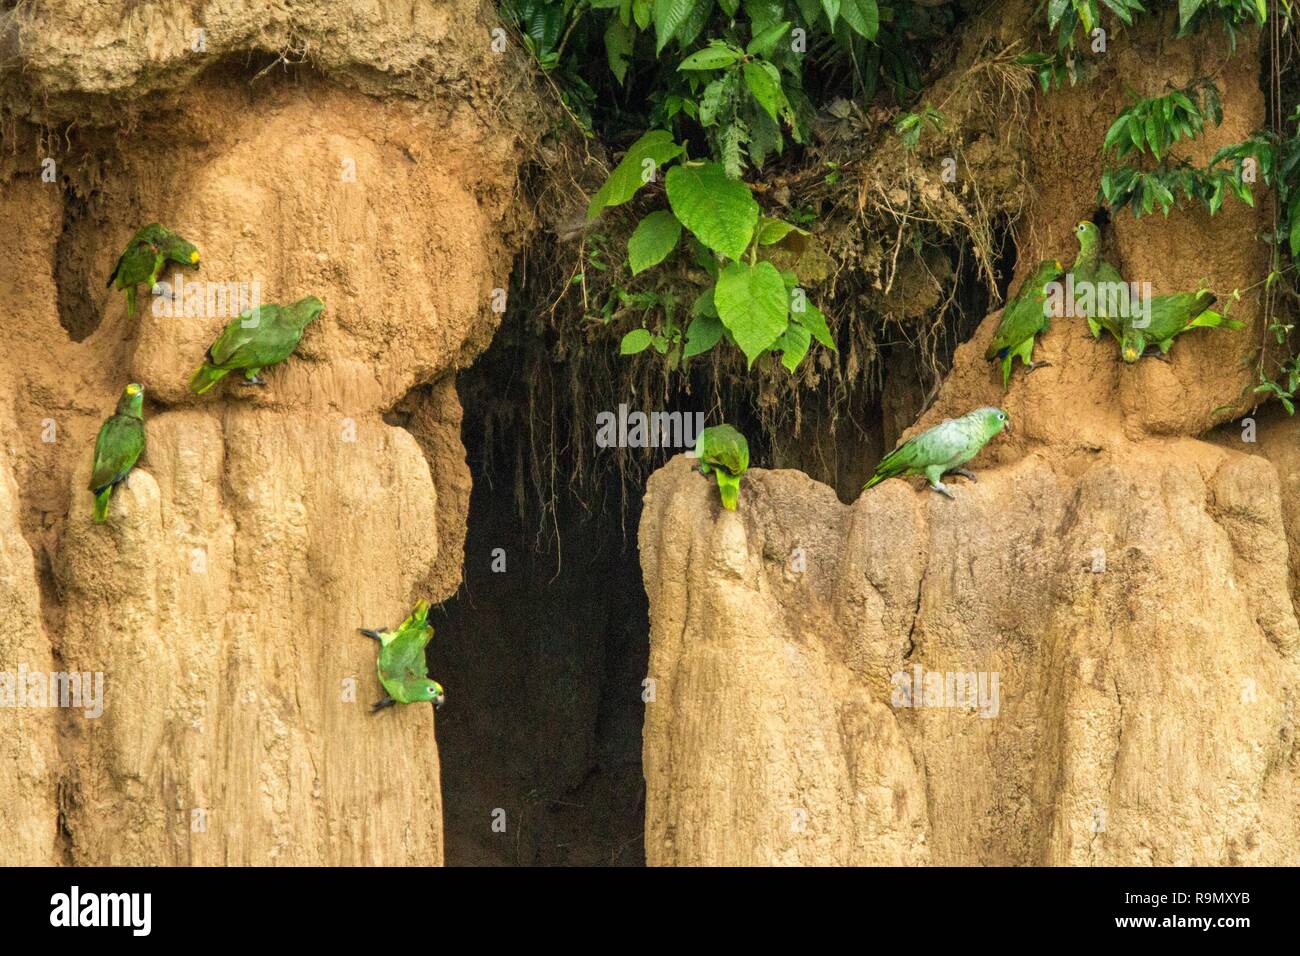 Green parrots on clay lick eating minerals, Green amazons in tropical forest, Brazil, Wildlife scene from tropical nature. Flock of birds on clay brow Stock Photo